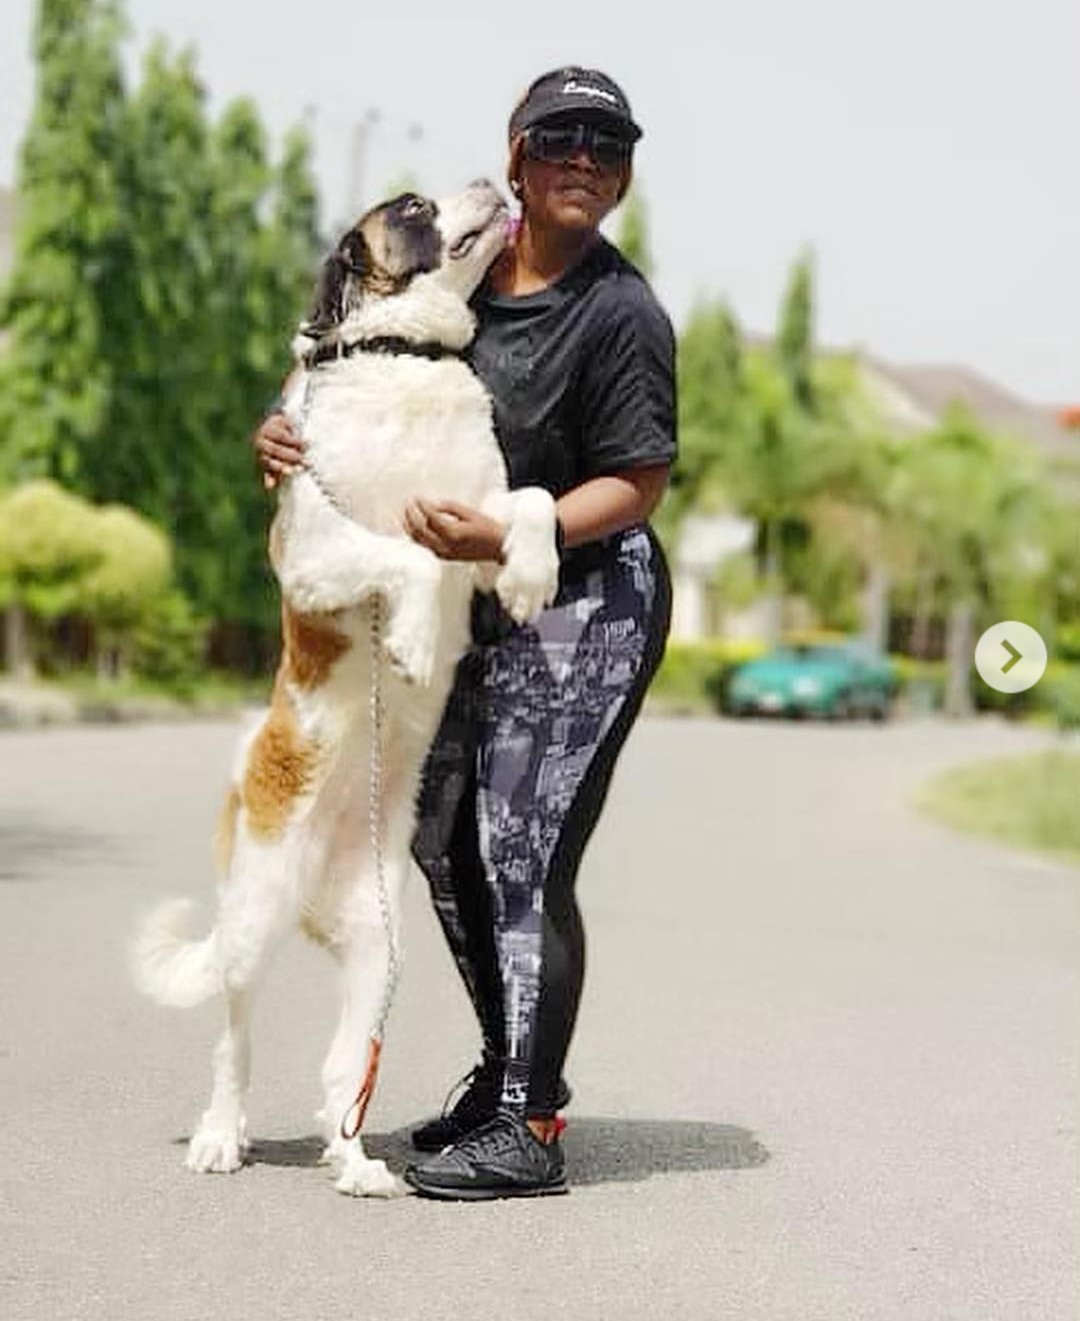 Empress Njamah behind her St. Bernard Dog supporting her from standing up while licking her face